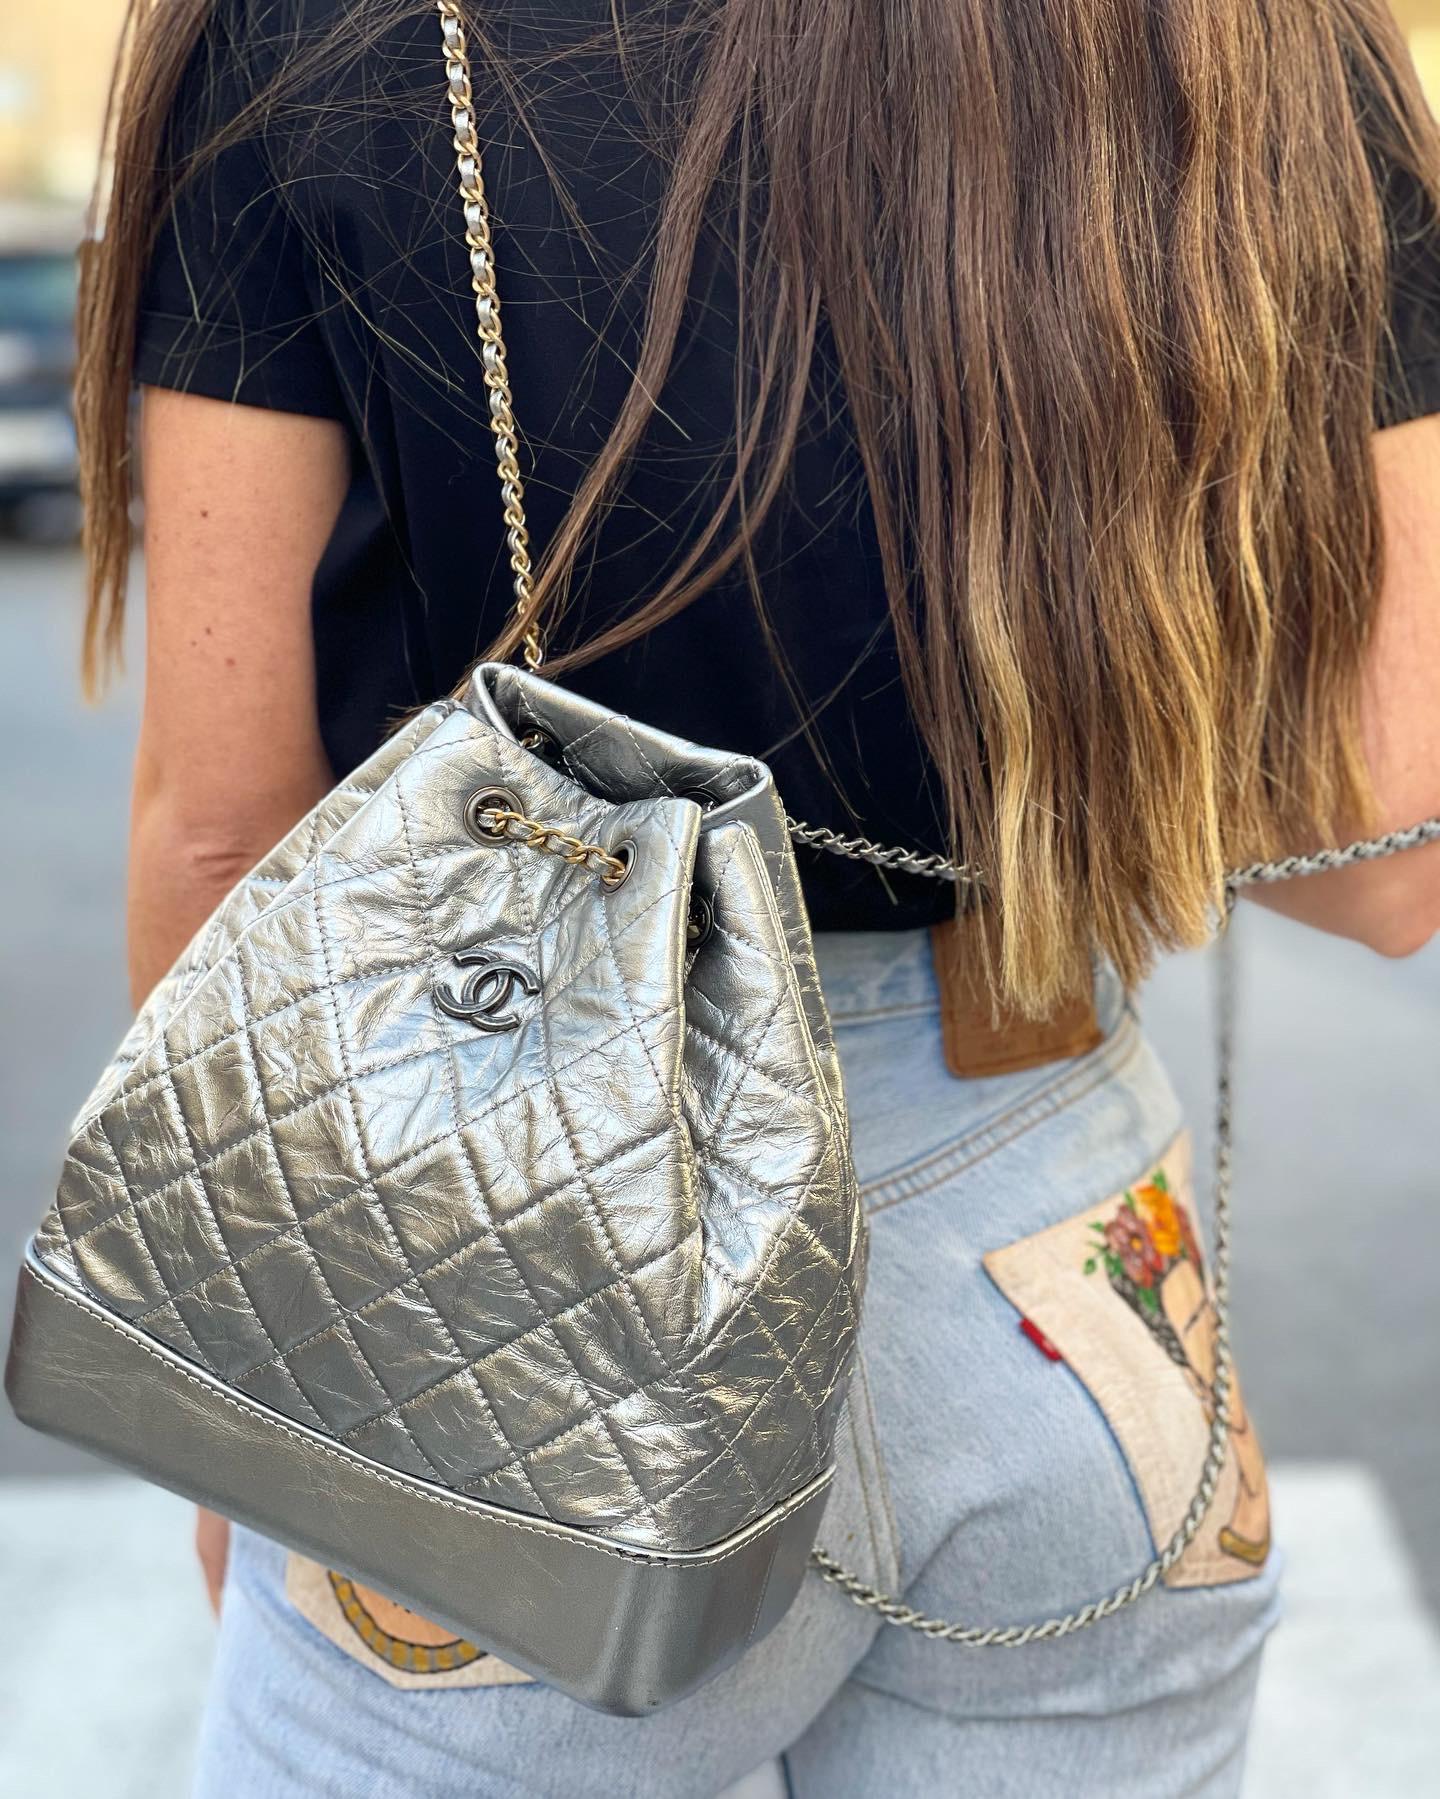 Chanel signed backpack, made of silver-colored quilted leather, with silver and gold hardware.
Equipped with two leather and chain shoulder straps that allow the backpack to be closed.
Internally lined in red fabric, equipped with a pocket without